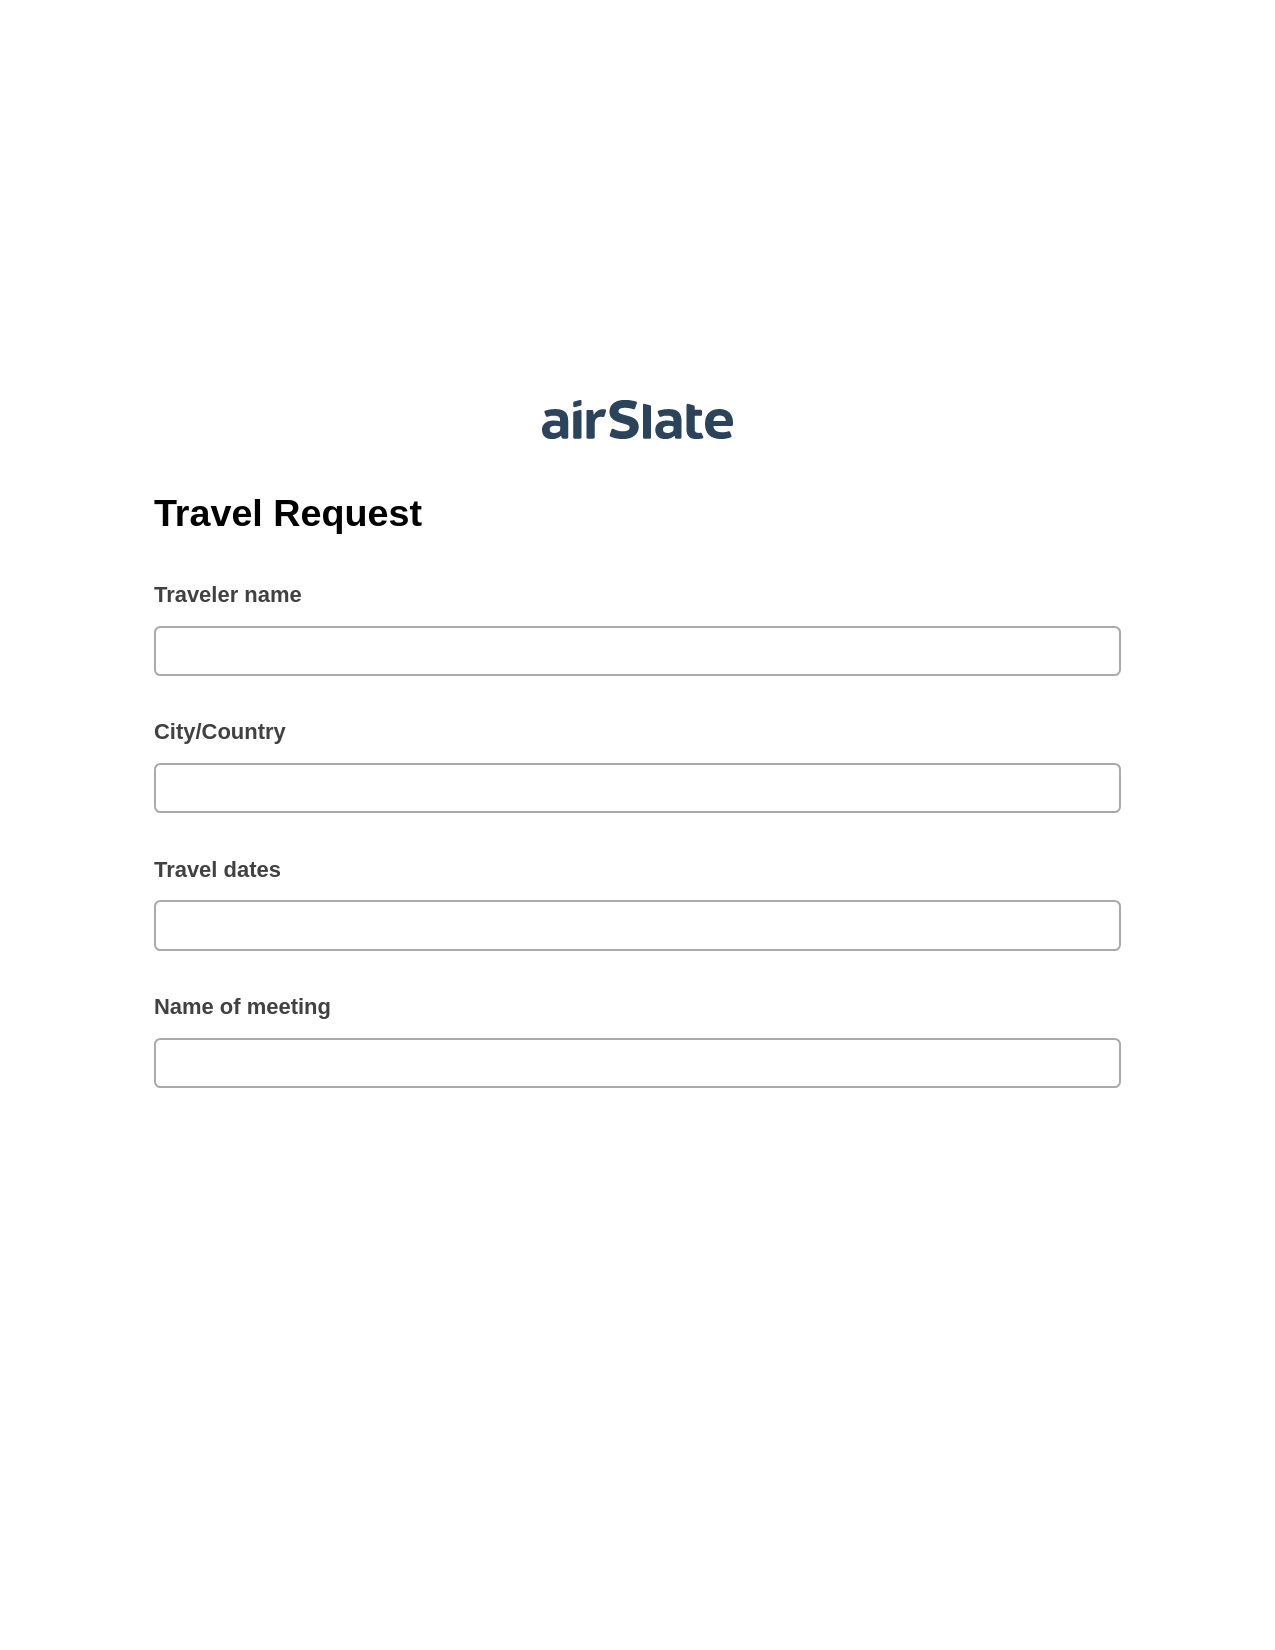 Travel Request Pre-fill from another Slate Bot, Reminder Bot, Google Drive Bot